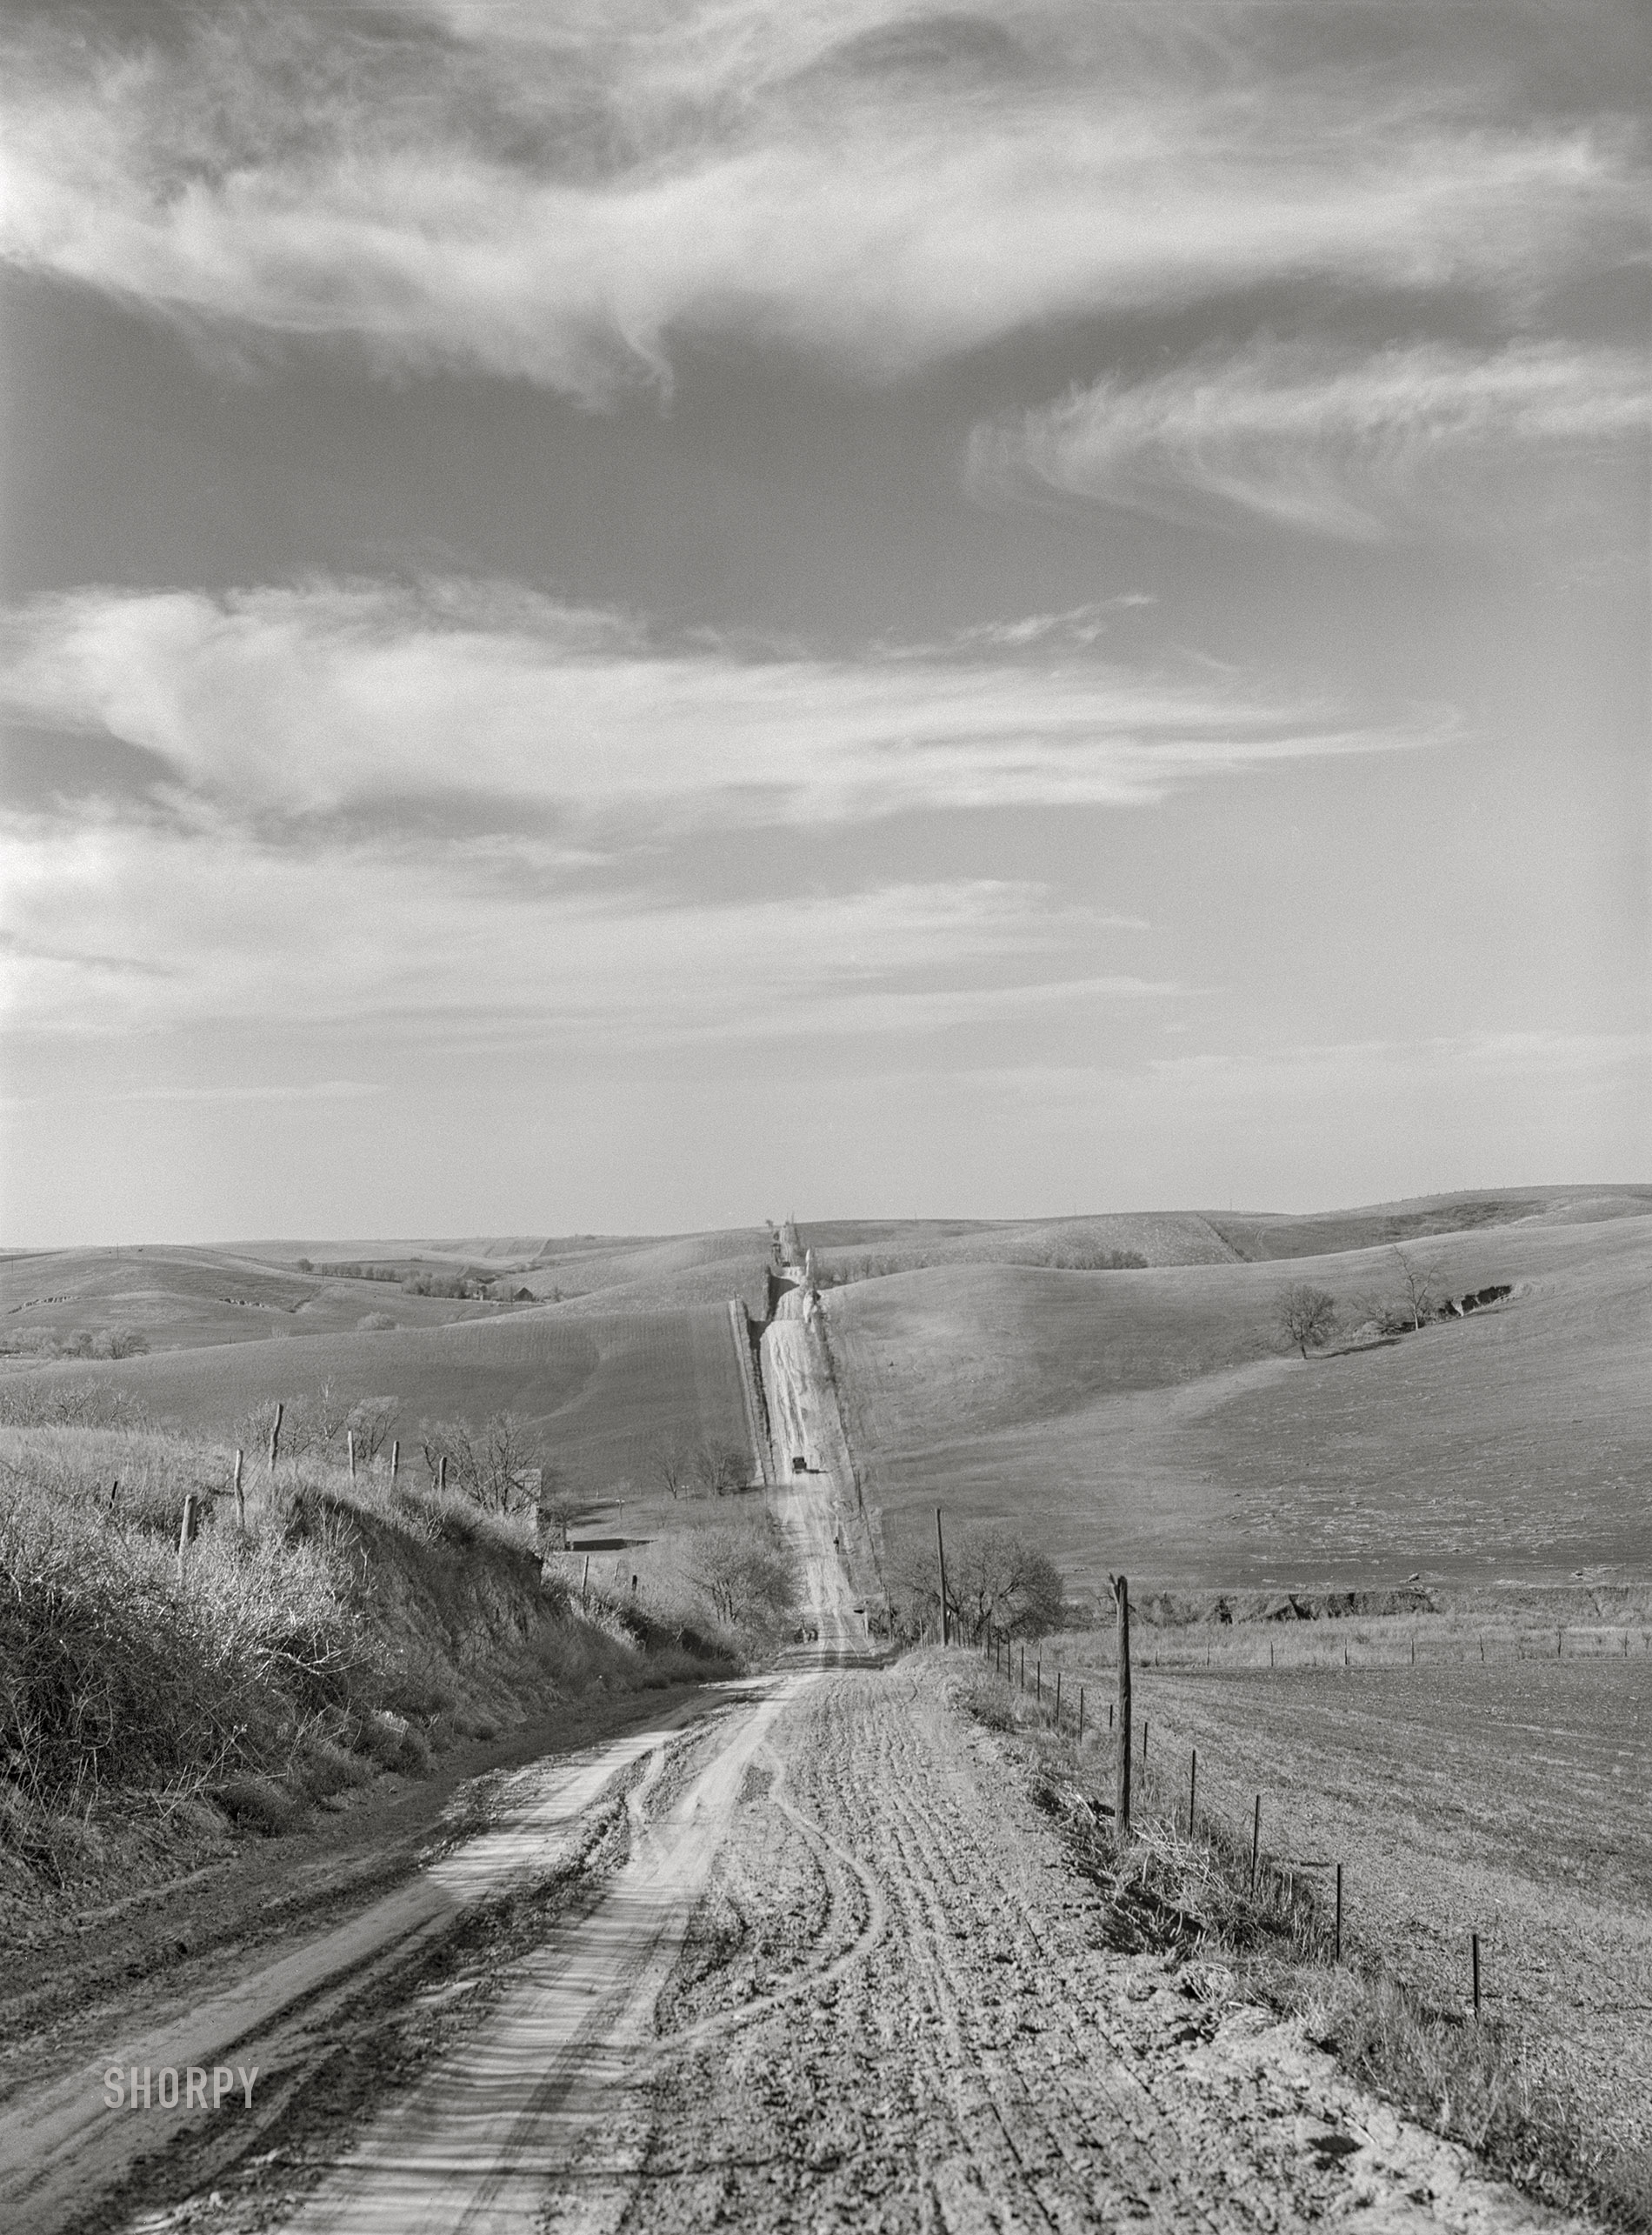 May 1940. "County road in Western Iowa corn country. Monona County." Medium format acetate negative by John Vachon for the Farm Security Administration. View full size.